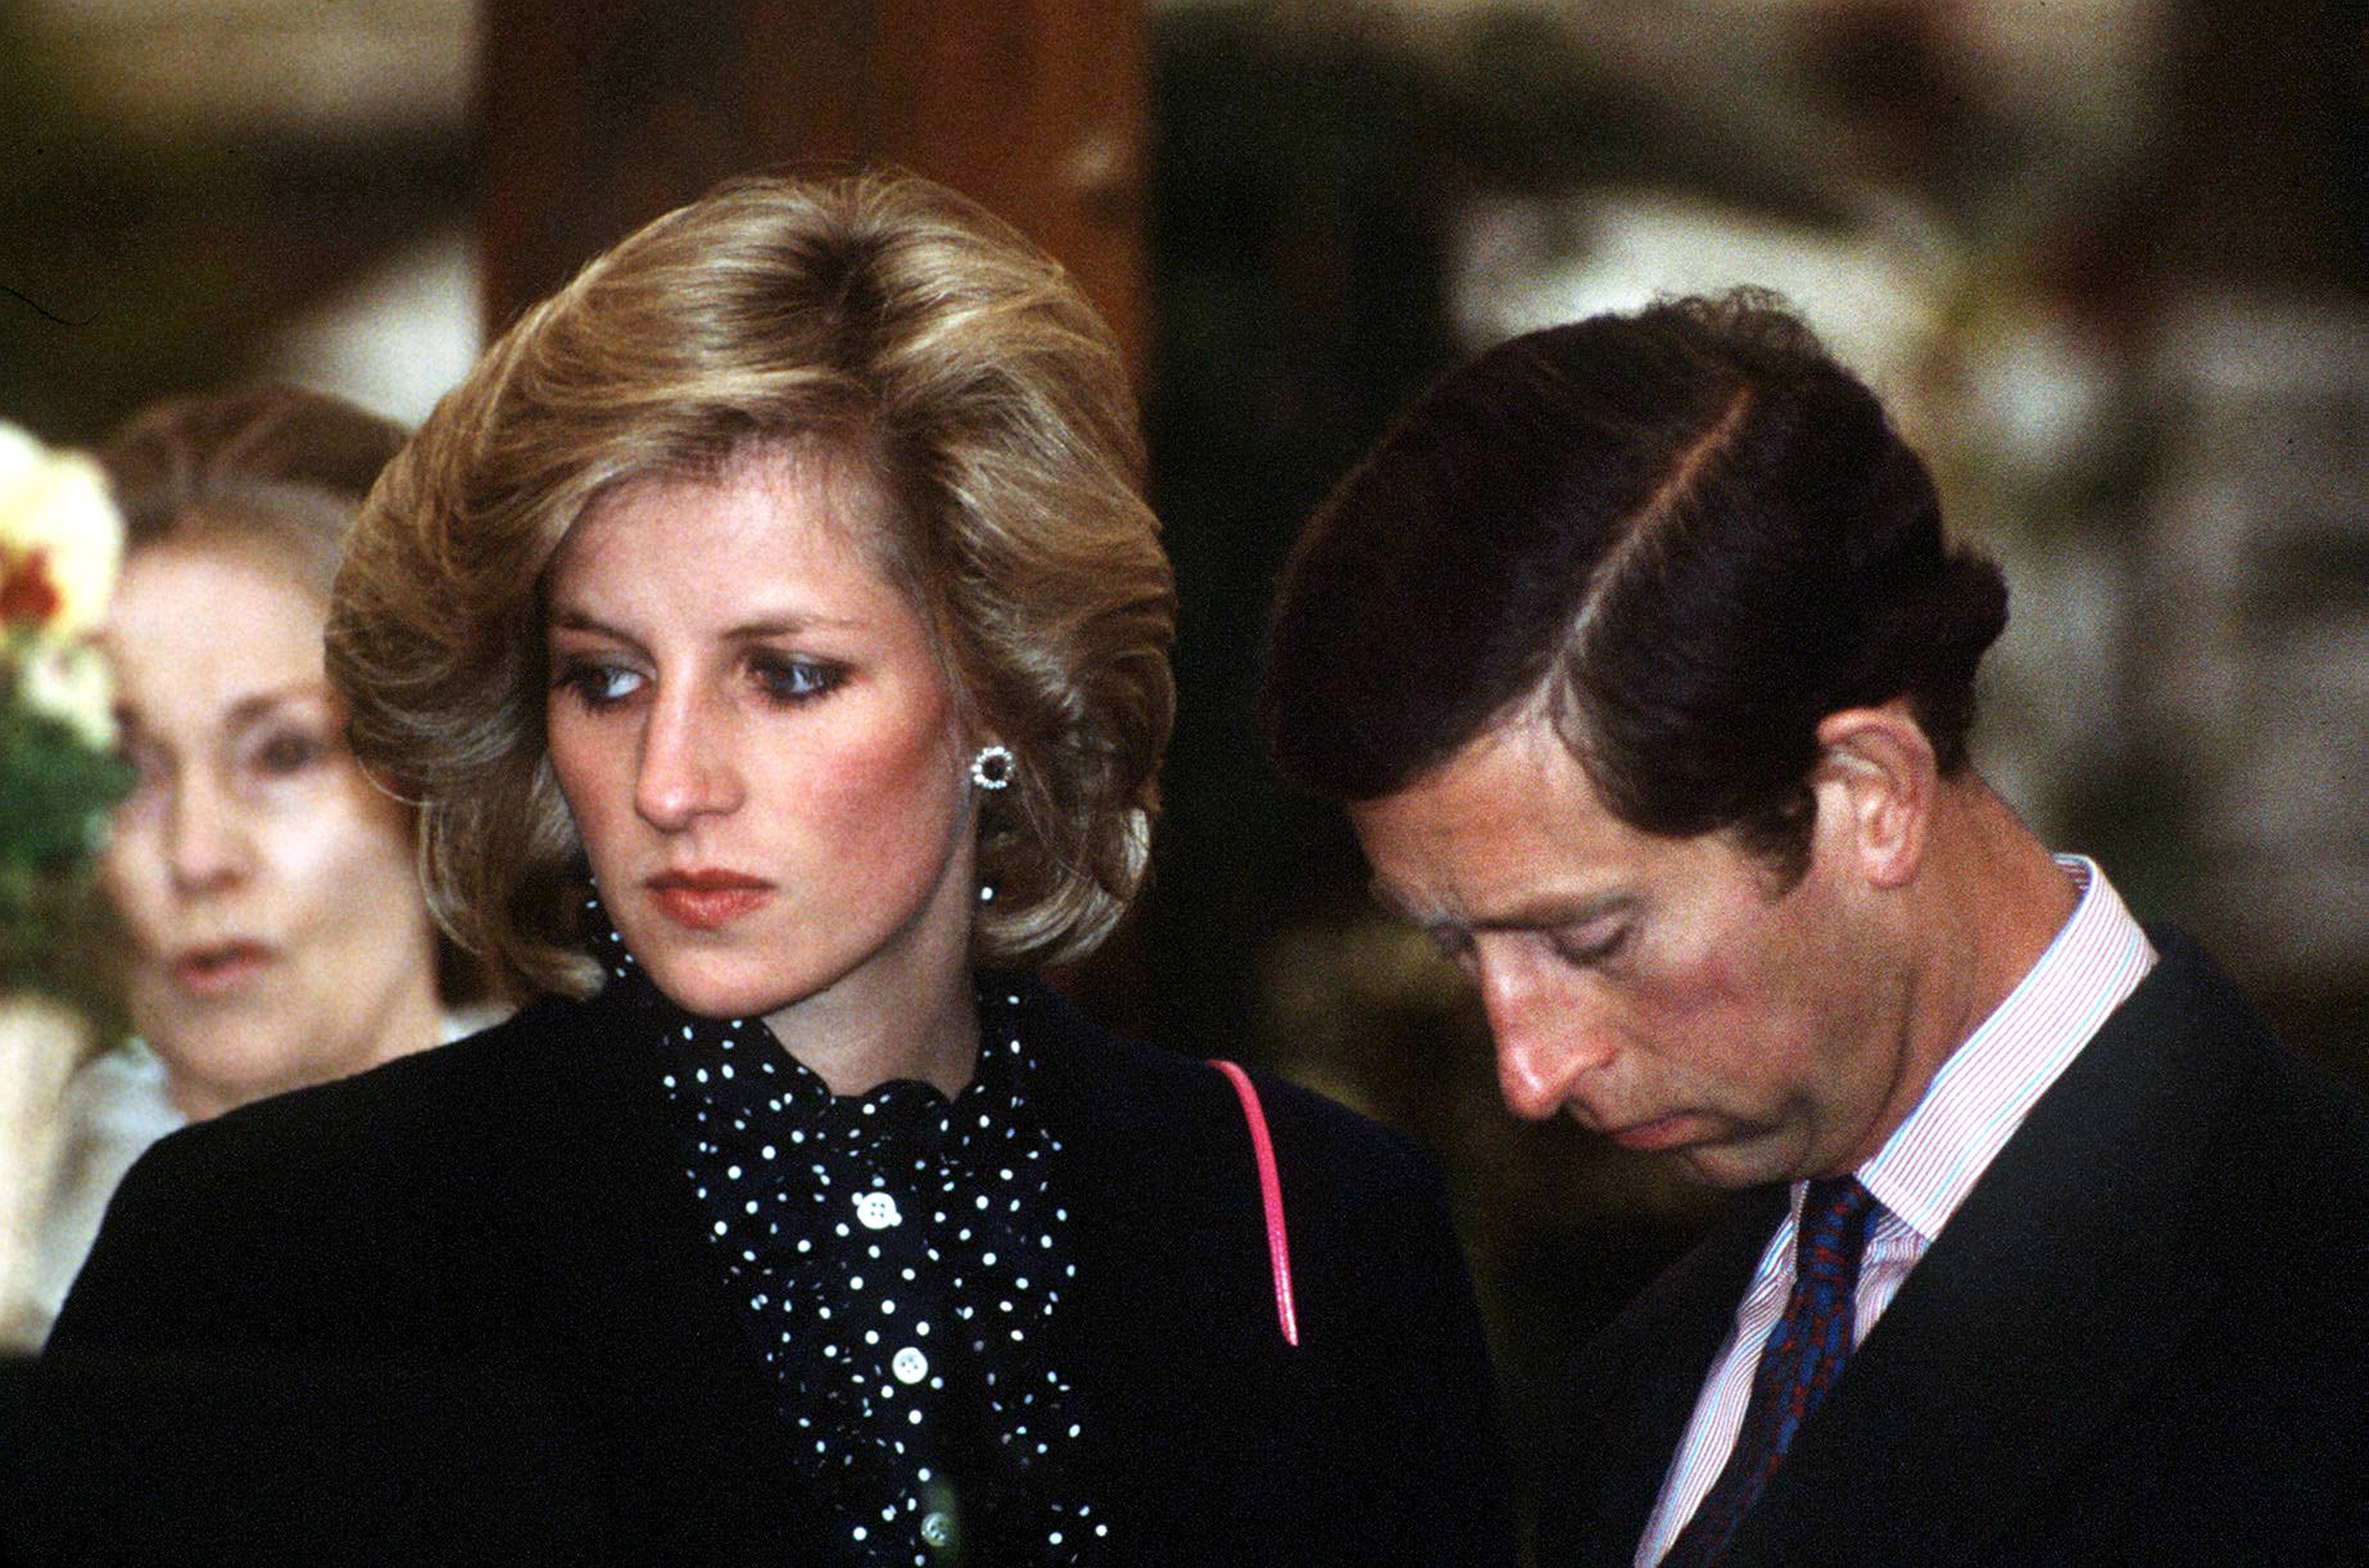 Prince Charles and his wife Princess Diana at the Chelsea Flower Show in May 1984 in London. / Source: Getty Images